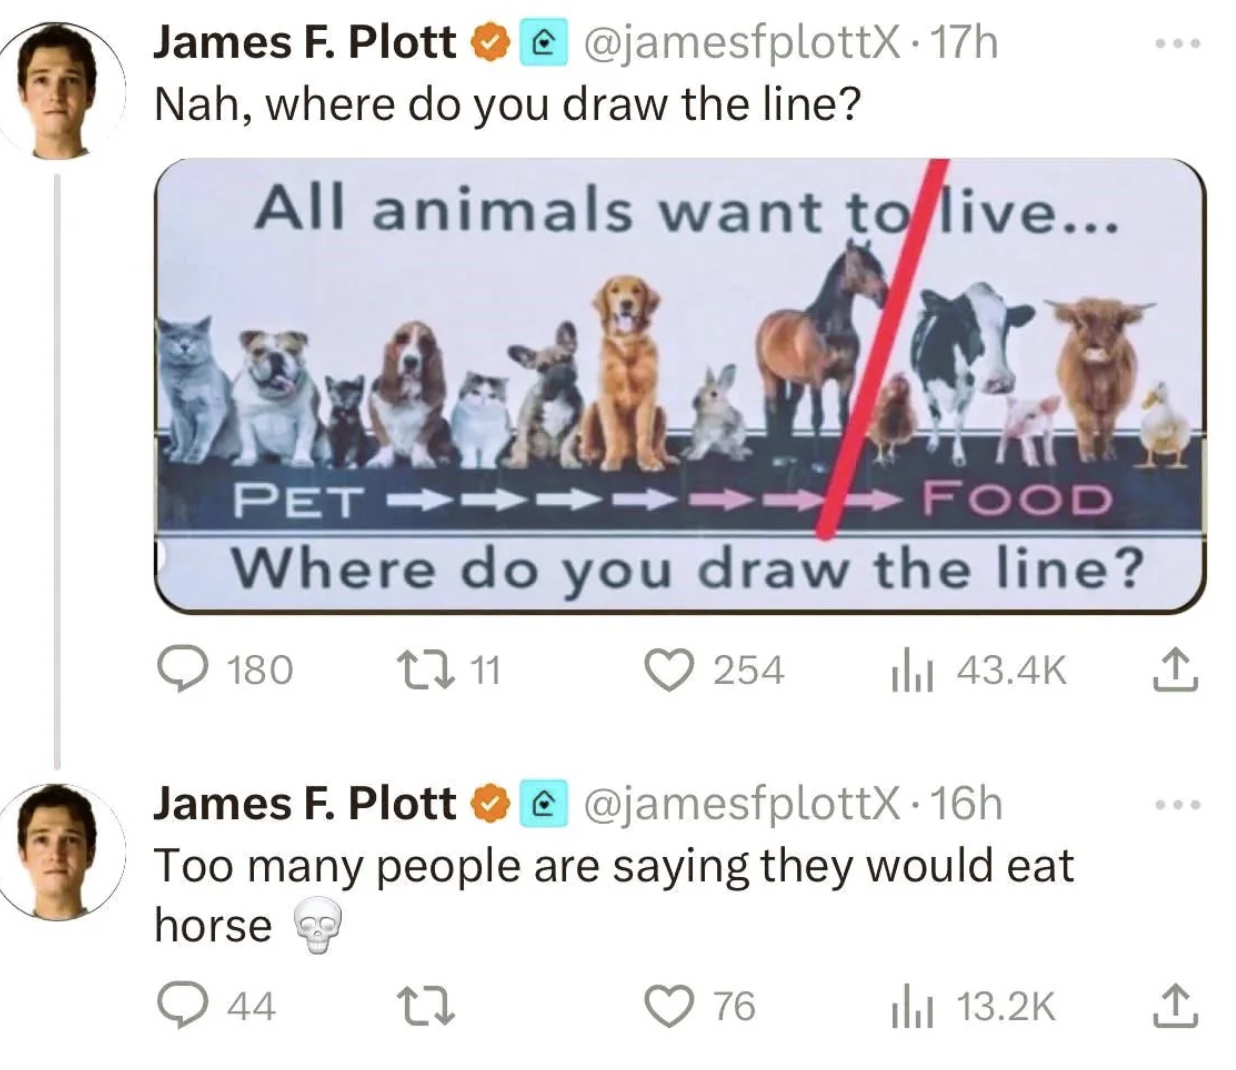 media - James F. Plotte . 17h Nah, where do you draw the line? All animals want to live... Pet>> Food Where do you draw the line? 22 11 254 ili 180 James F. Plotte Too many people are saying they would eat horse 44 22 76 il